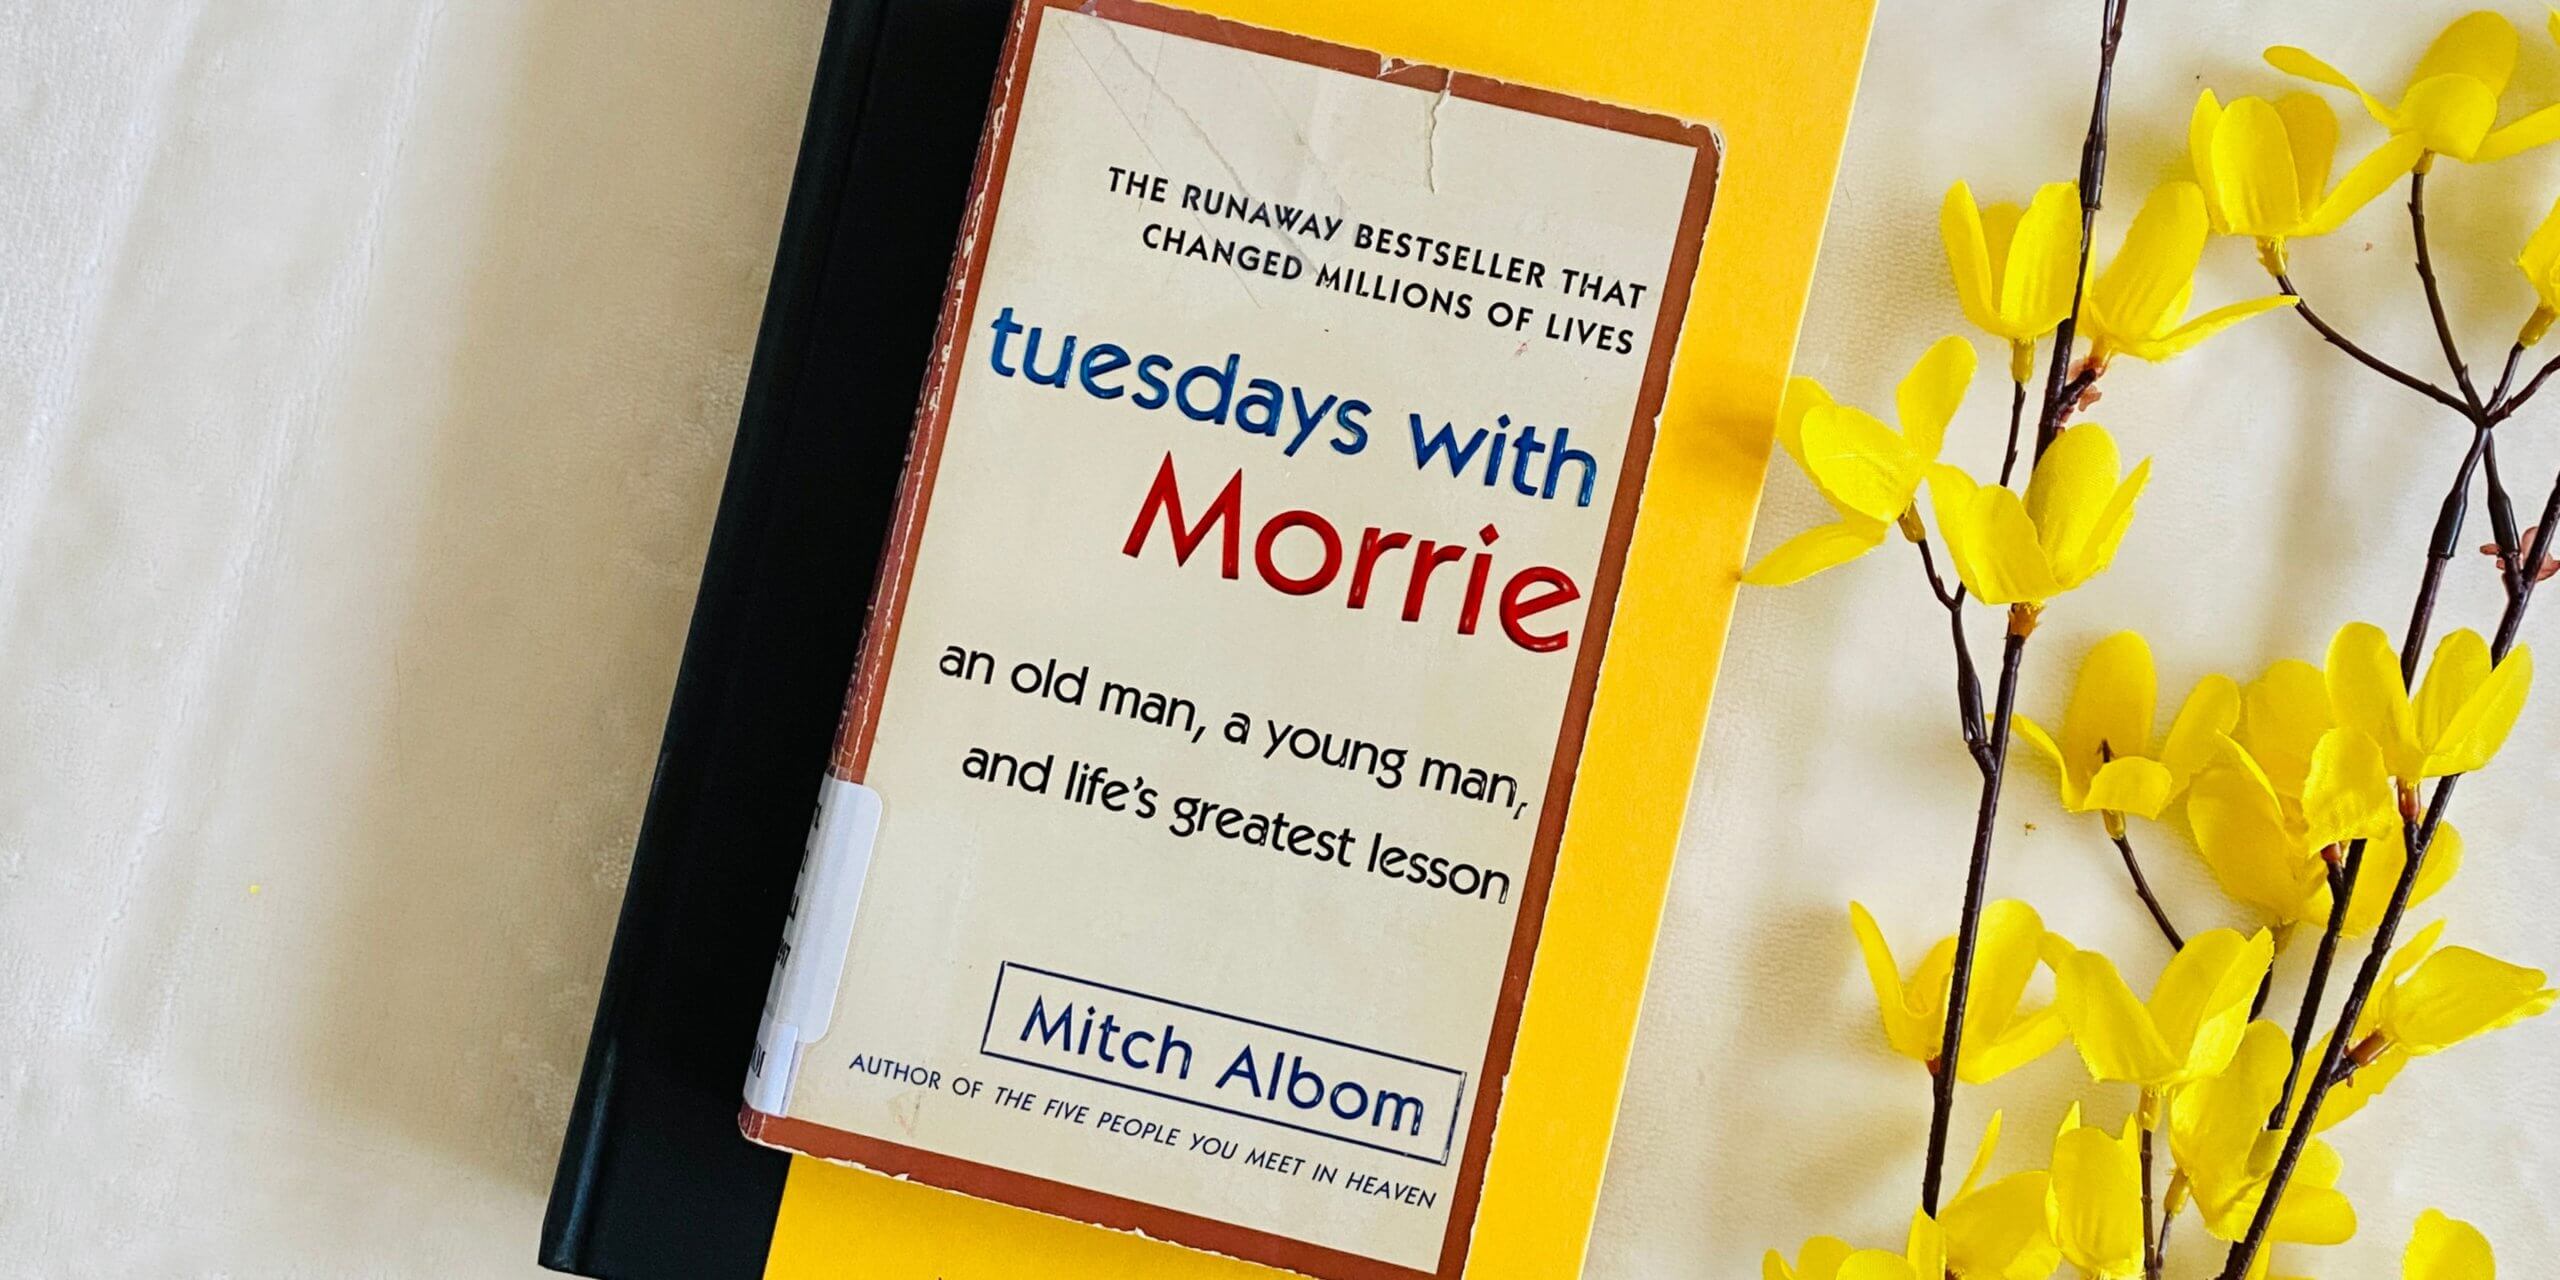 Book Review: Being Tuesday People with Morrie (Tuesday's with Morrie by  Mitch Albom)